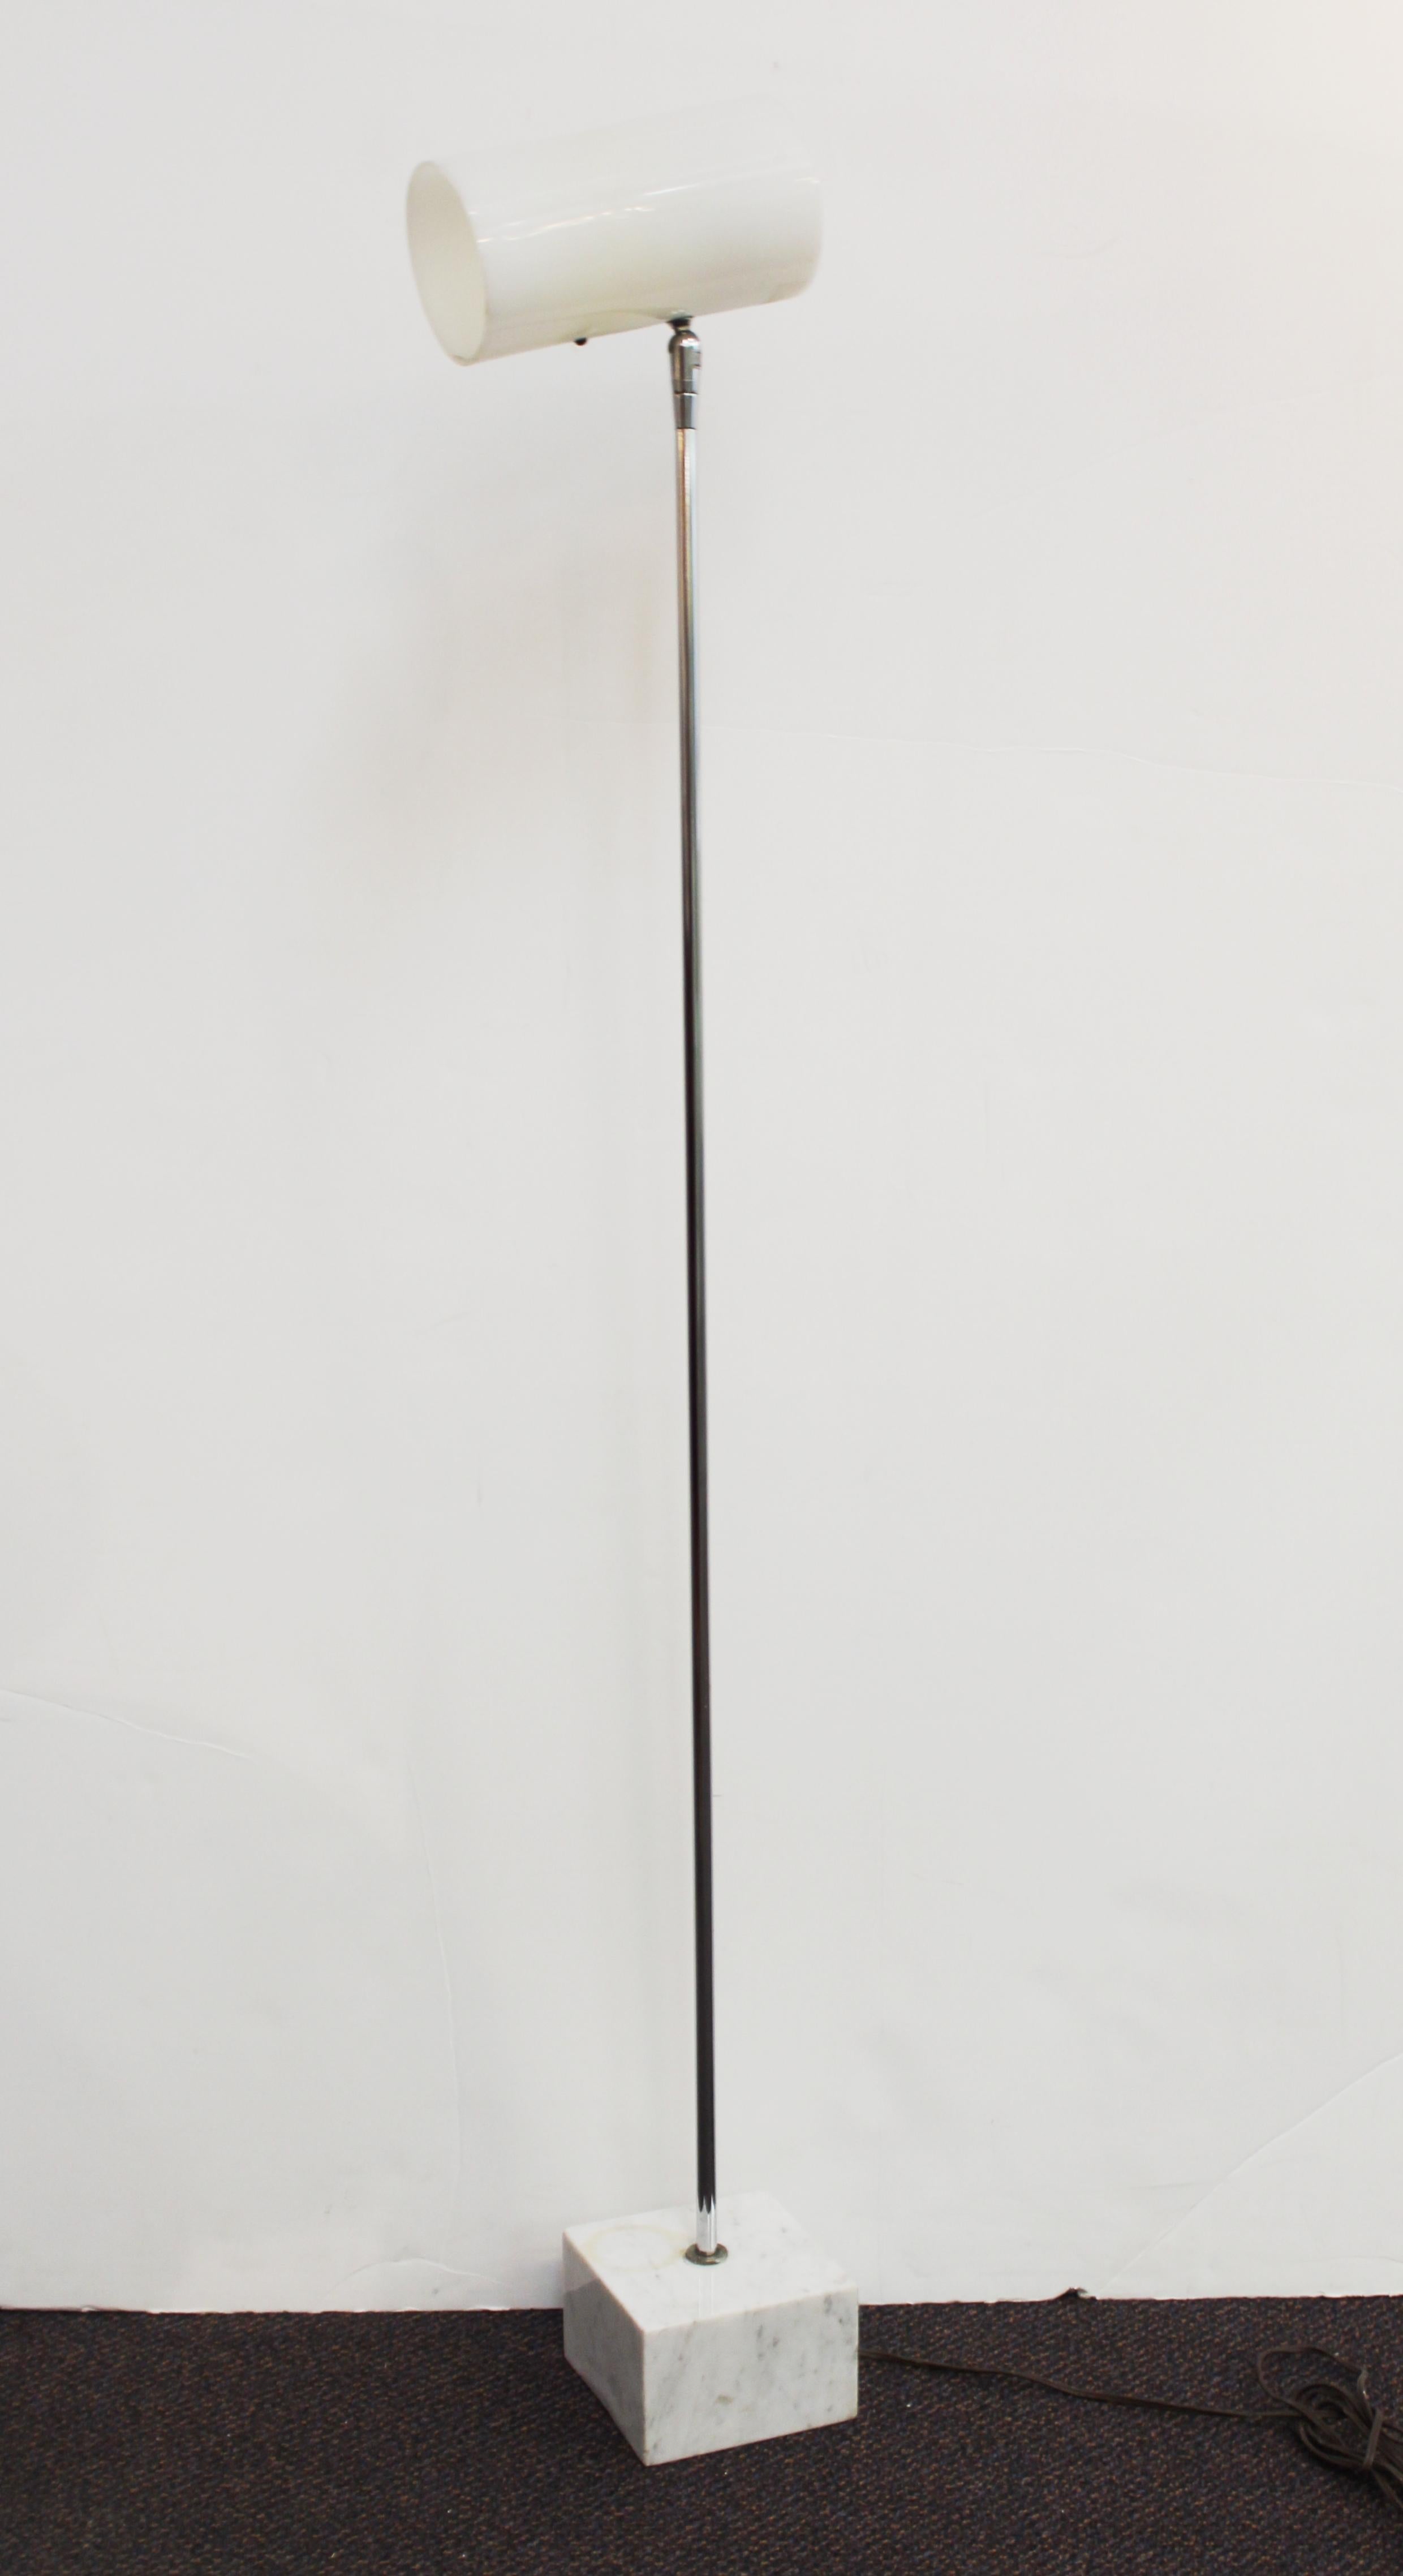 Modern floor lamp designed by Robert Sonneman for Kovacs, with white marble base. Some heat damage to the inside of the composite material shade, but in overall great vintage condition.